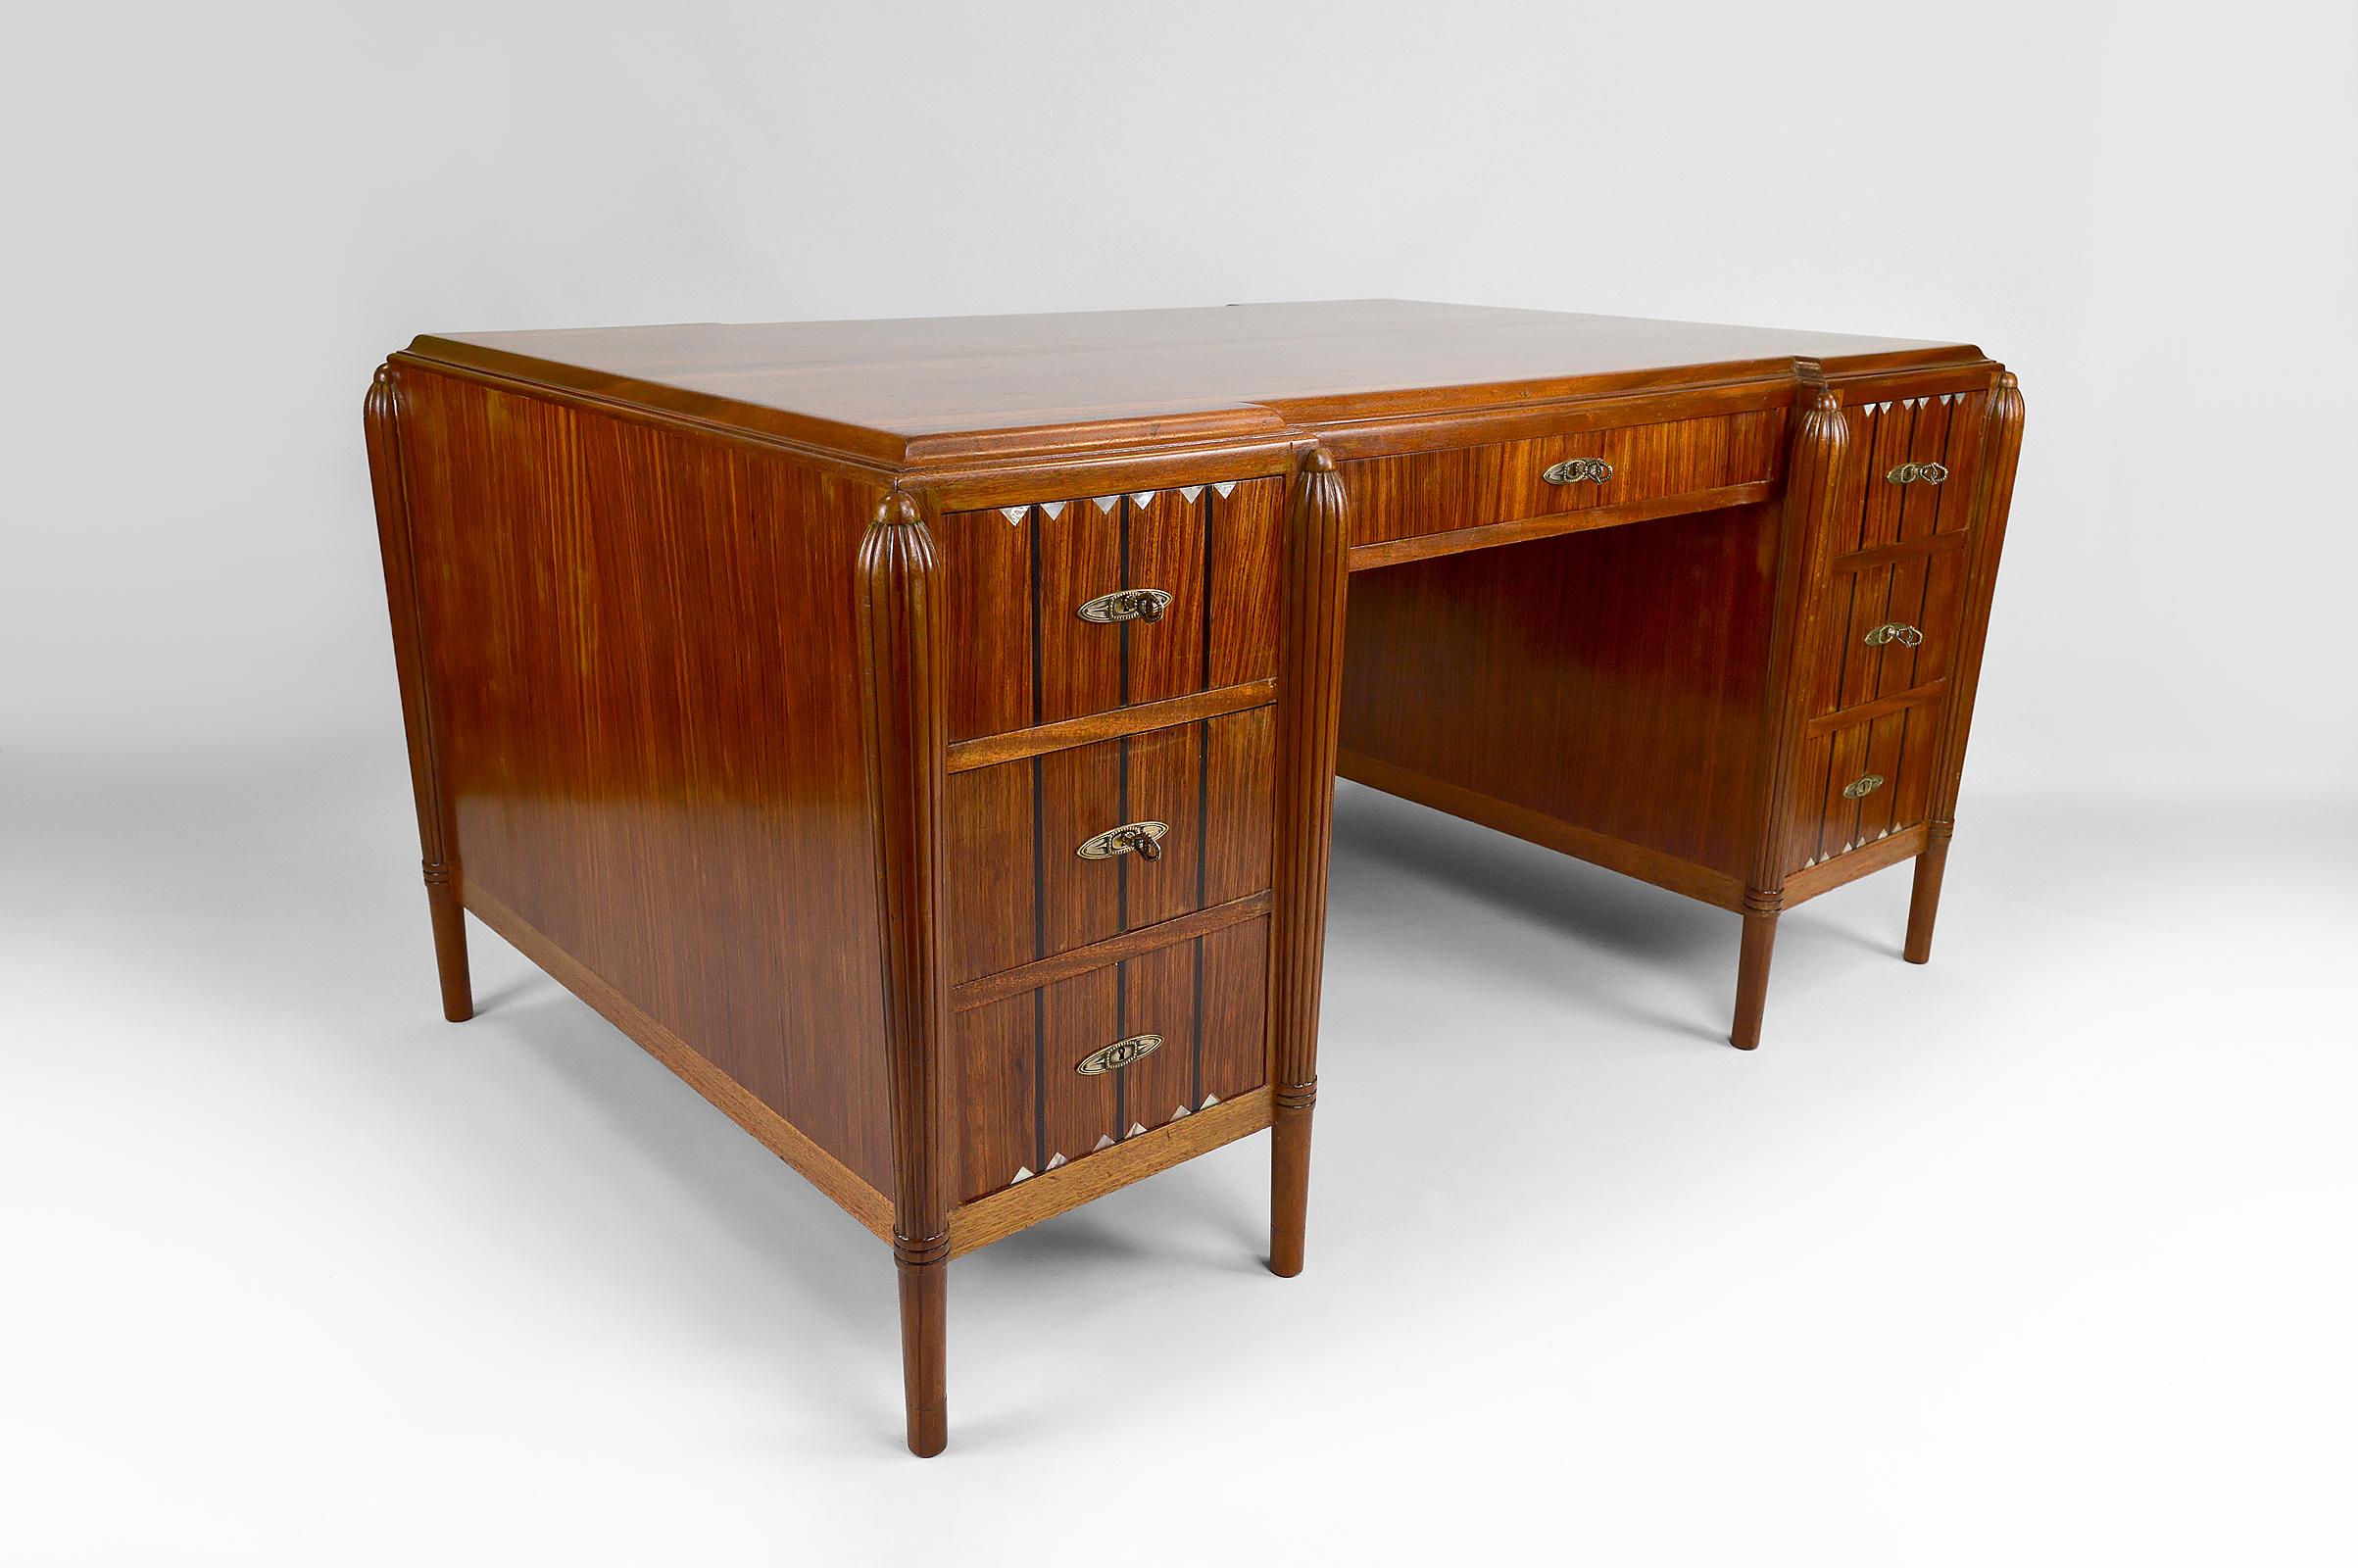 French Large Art Deco Desk in Rosewood, Mother-of-Pearl and Ebony, France, circa 1920